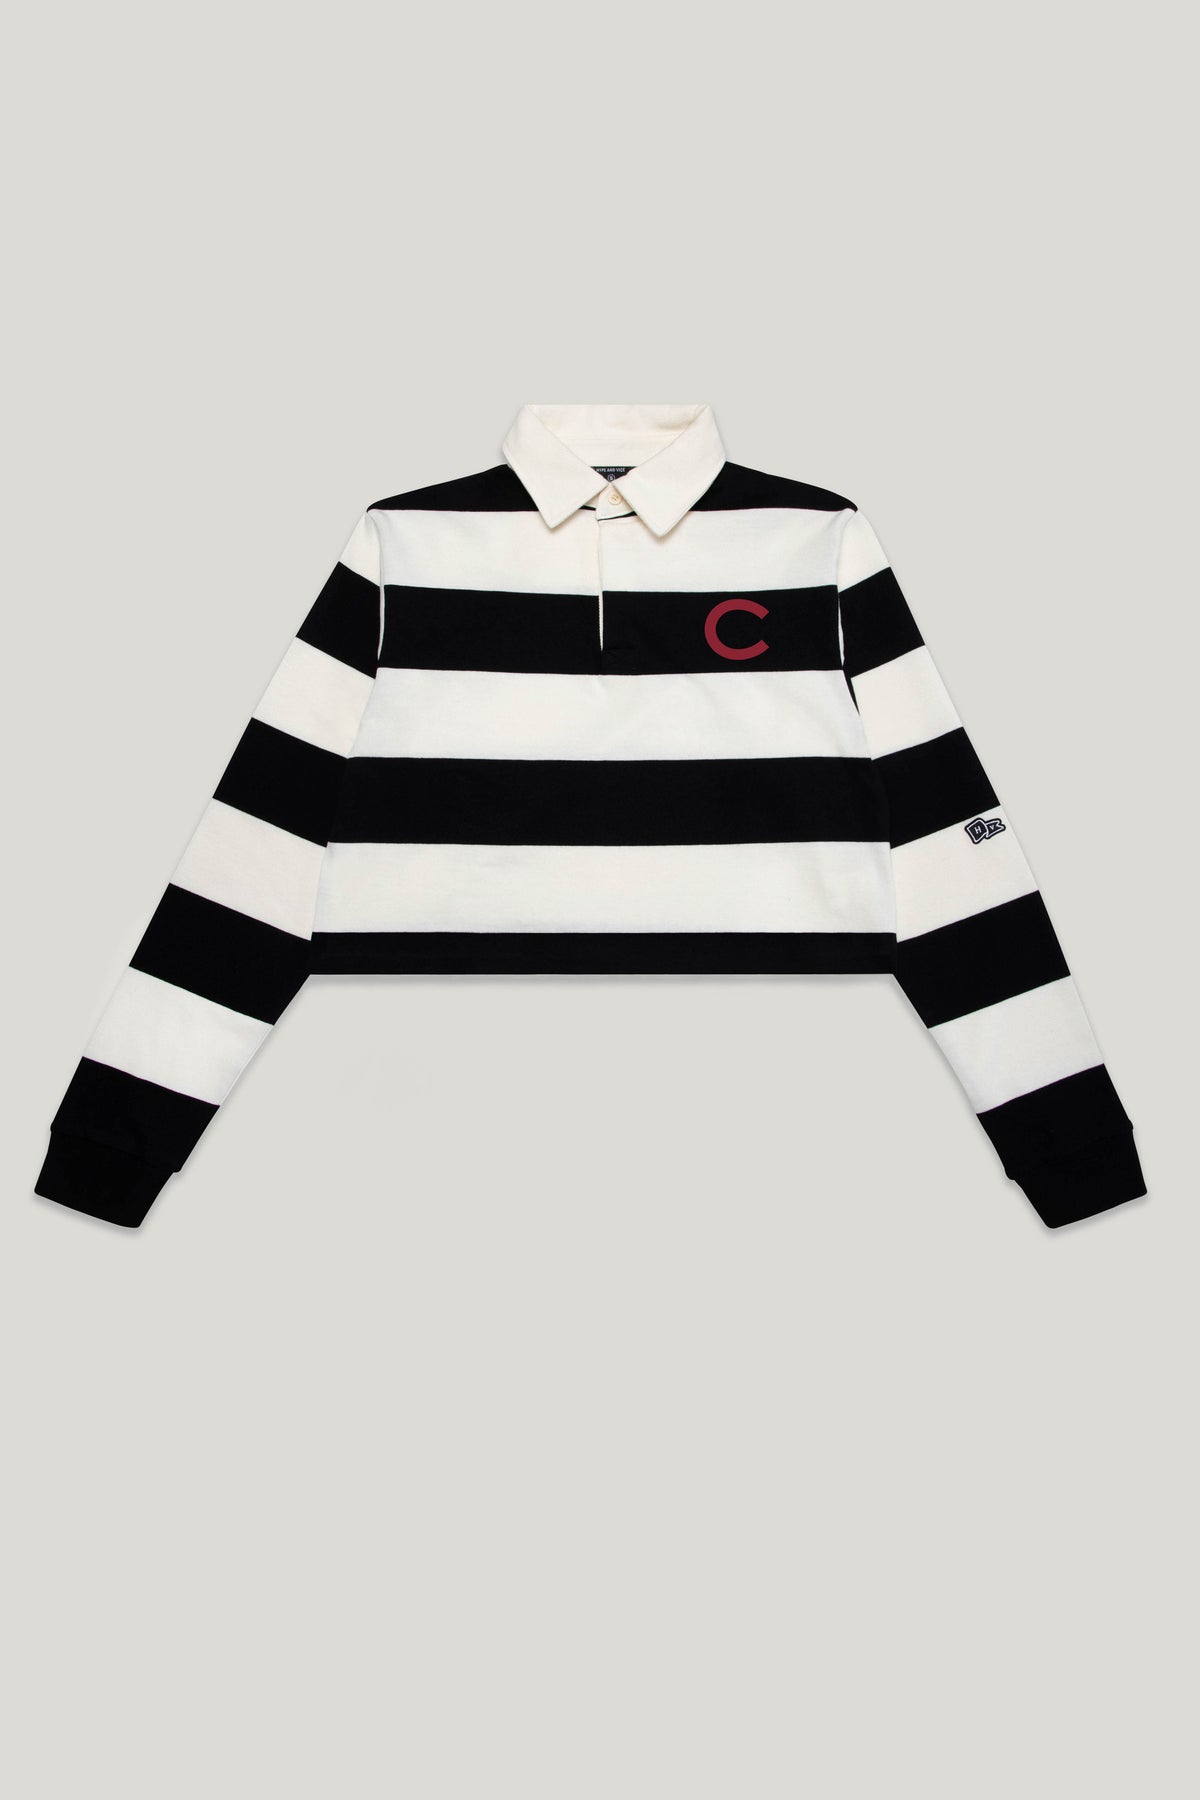 Colgate University Rugby Top